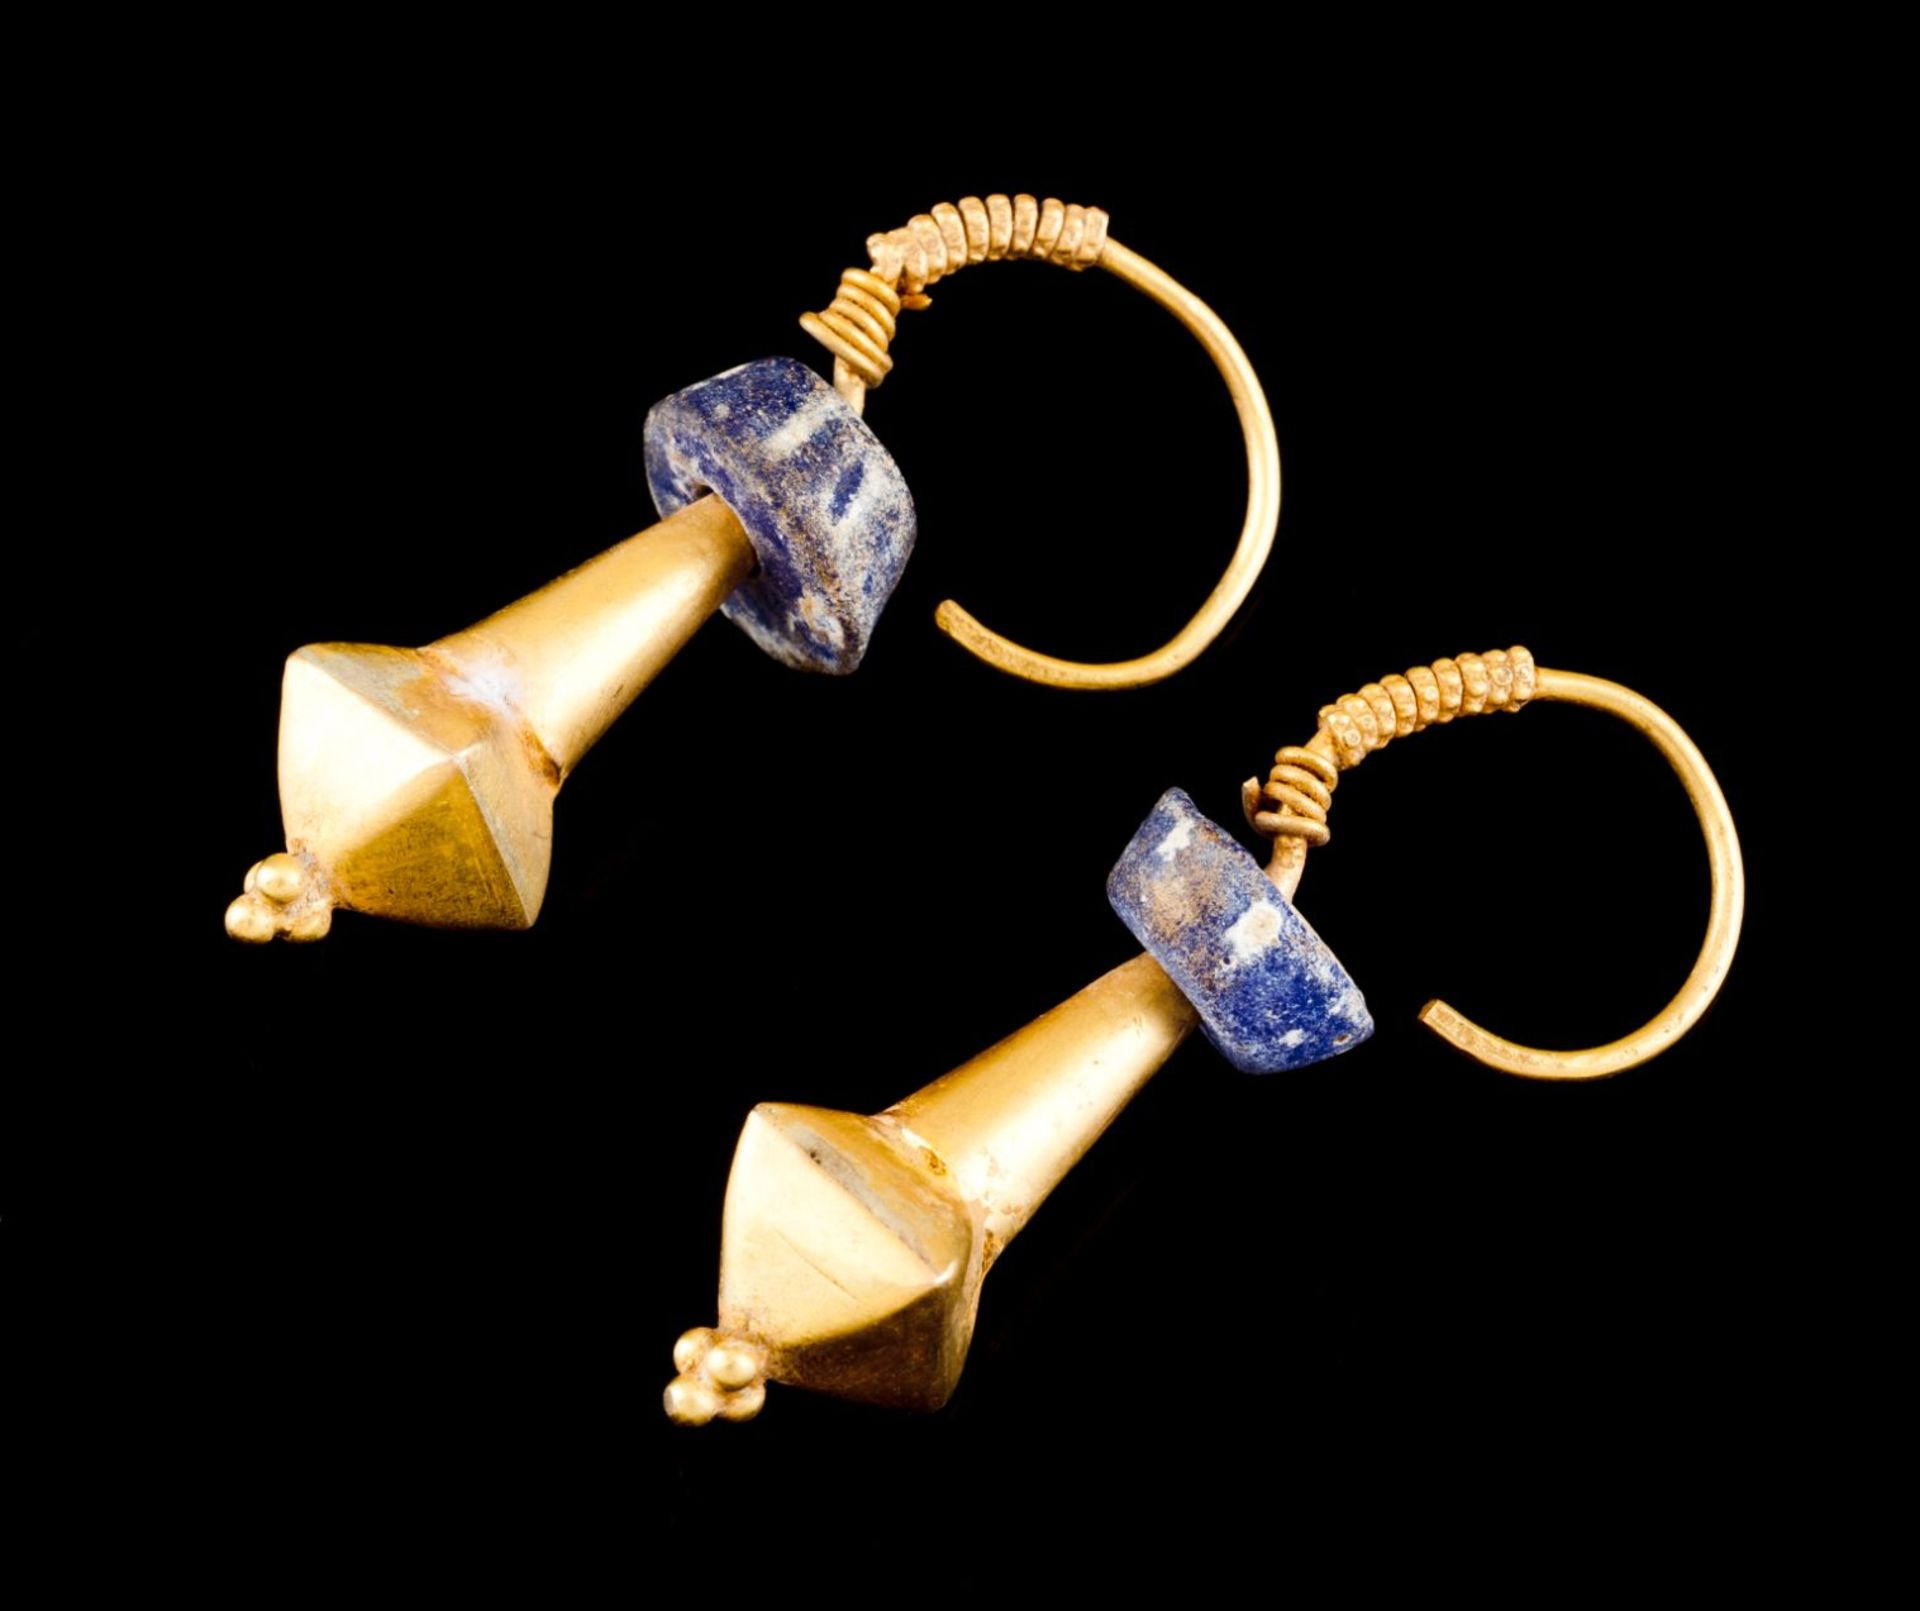 A pair of Roman earringsGold Spindle of orthorhombic finial suspended by loop of twisted thread